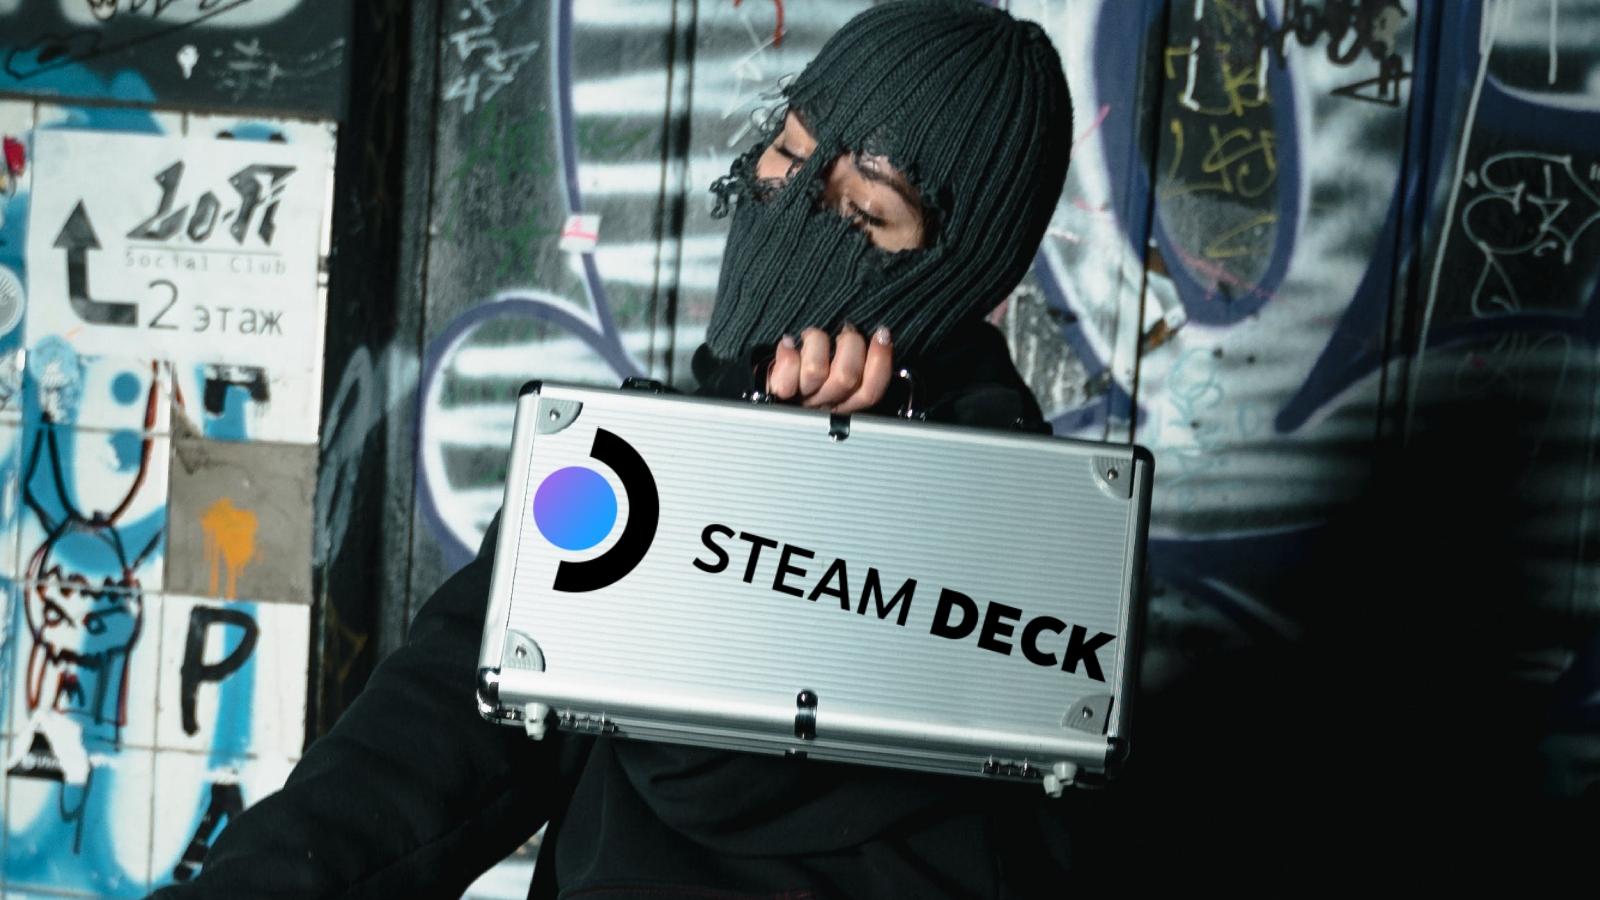 Robber holding a silver briefcase with a Steam Deck logo inside of a warehouse with graffiti on the walls.